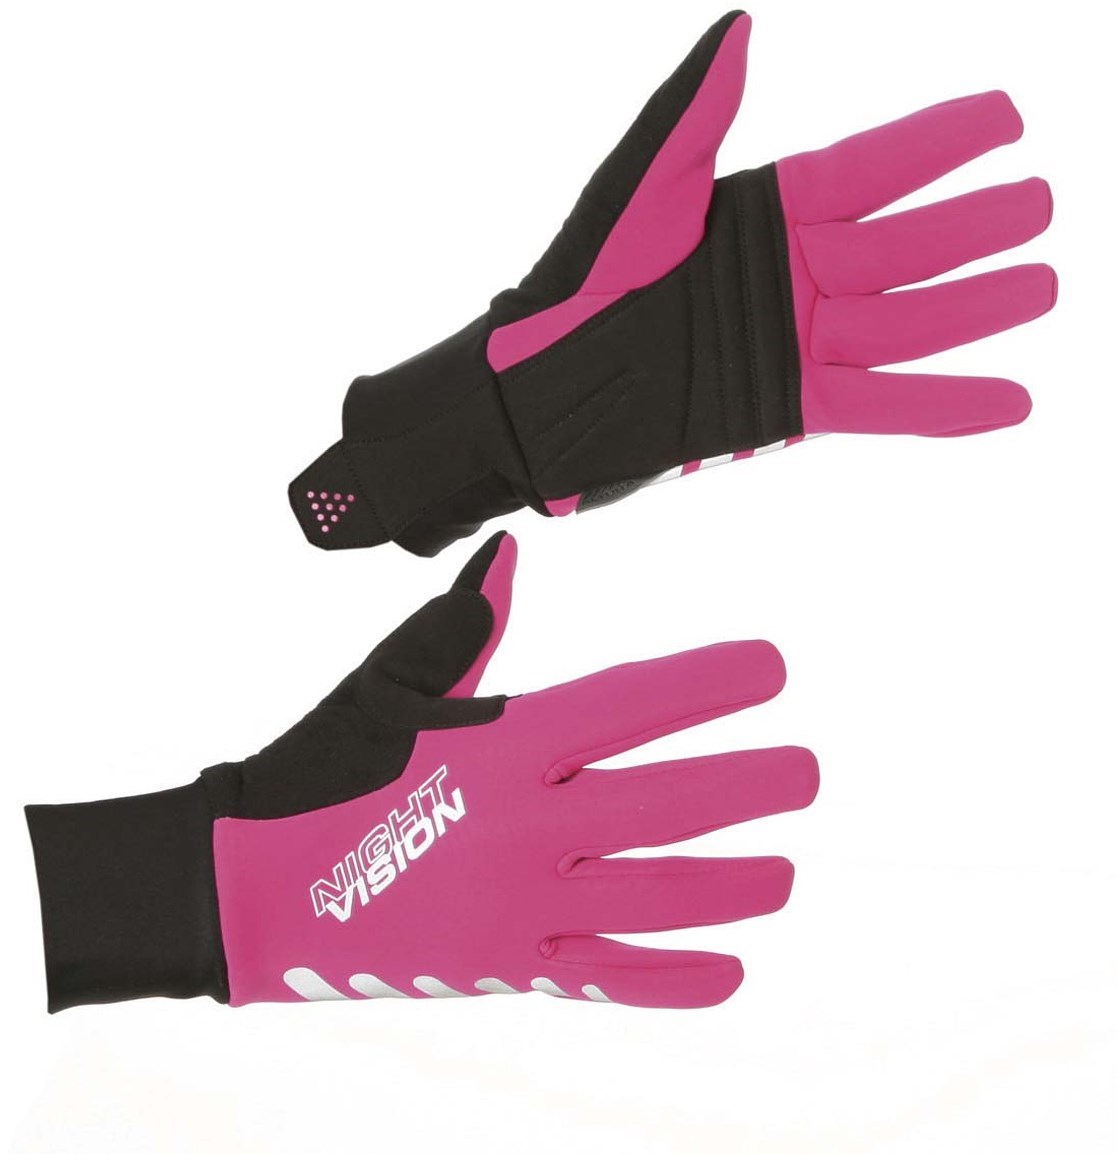 Zyro Night Vision Womens Windproof Gloves 2011 product image